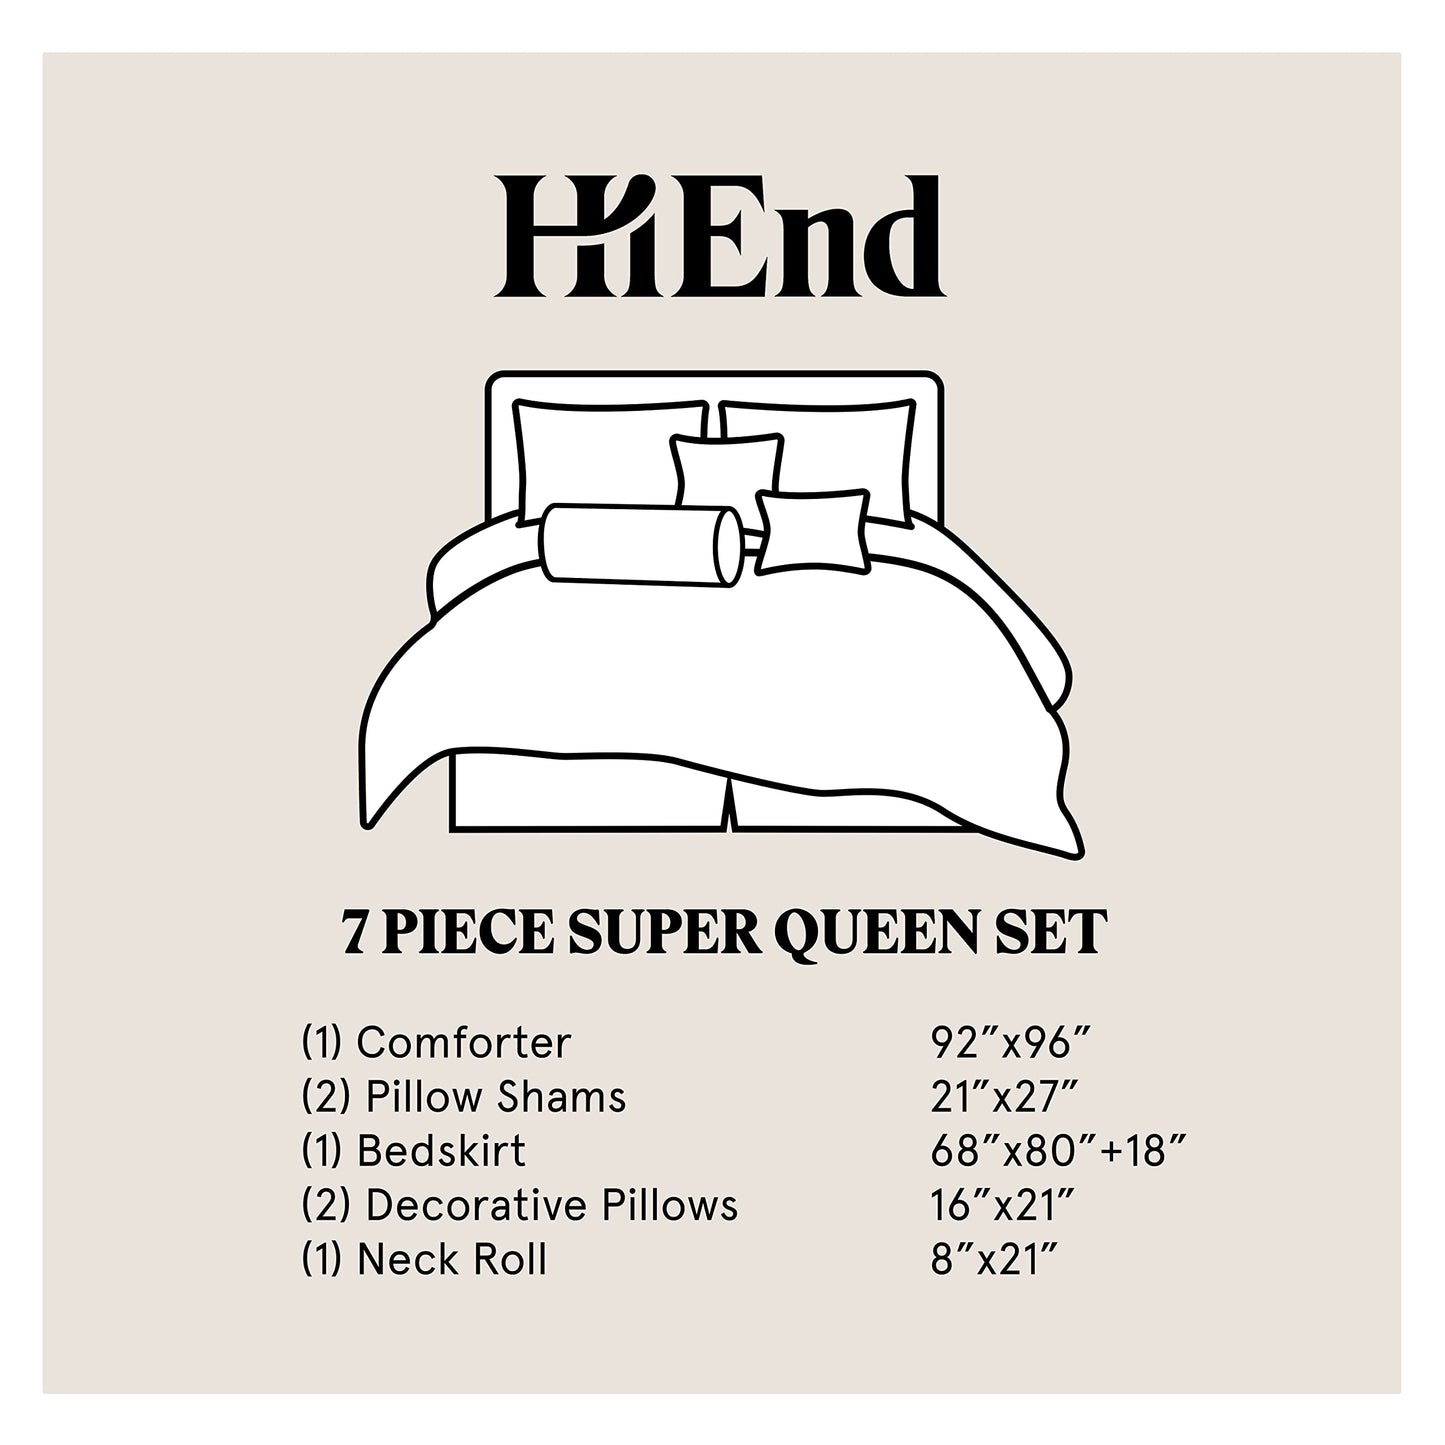 Paseo Road by HiEnd Accents Cheyenne Western Bedding 7 Piece Super Queen Comforter Set, Red Faux Tooled Leather Rustic Cabin Theme Bed Set, Comforter Sets with Bed Skirt, Shams, Decorative Pillows